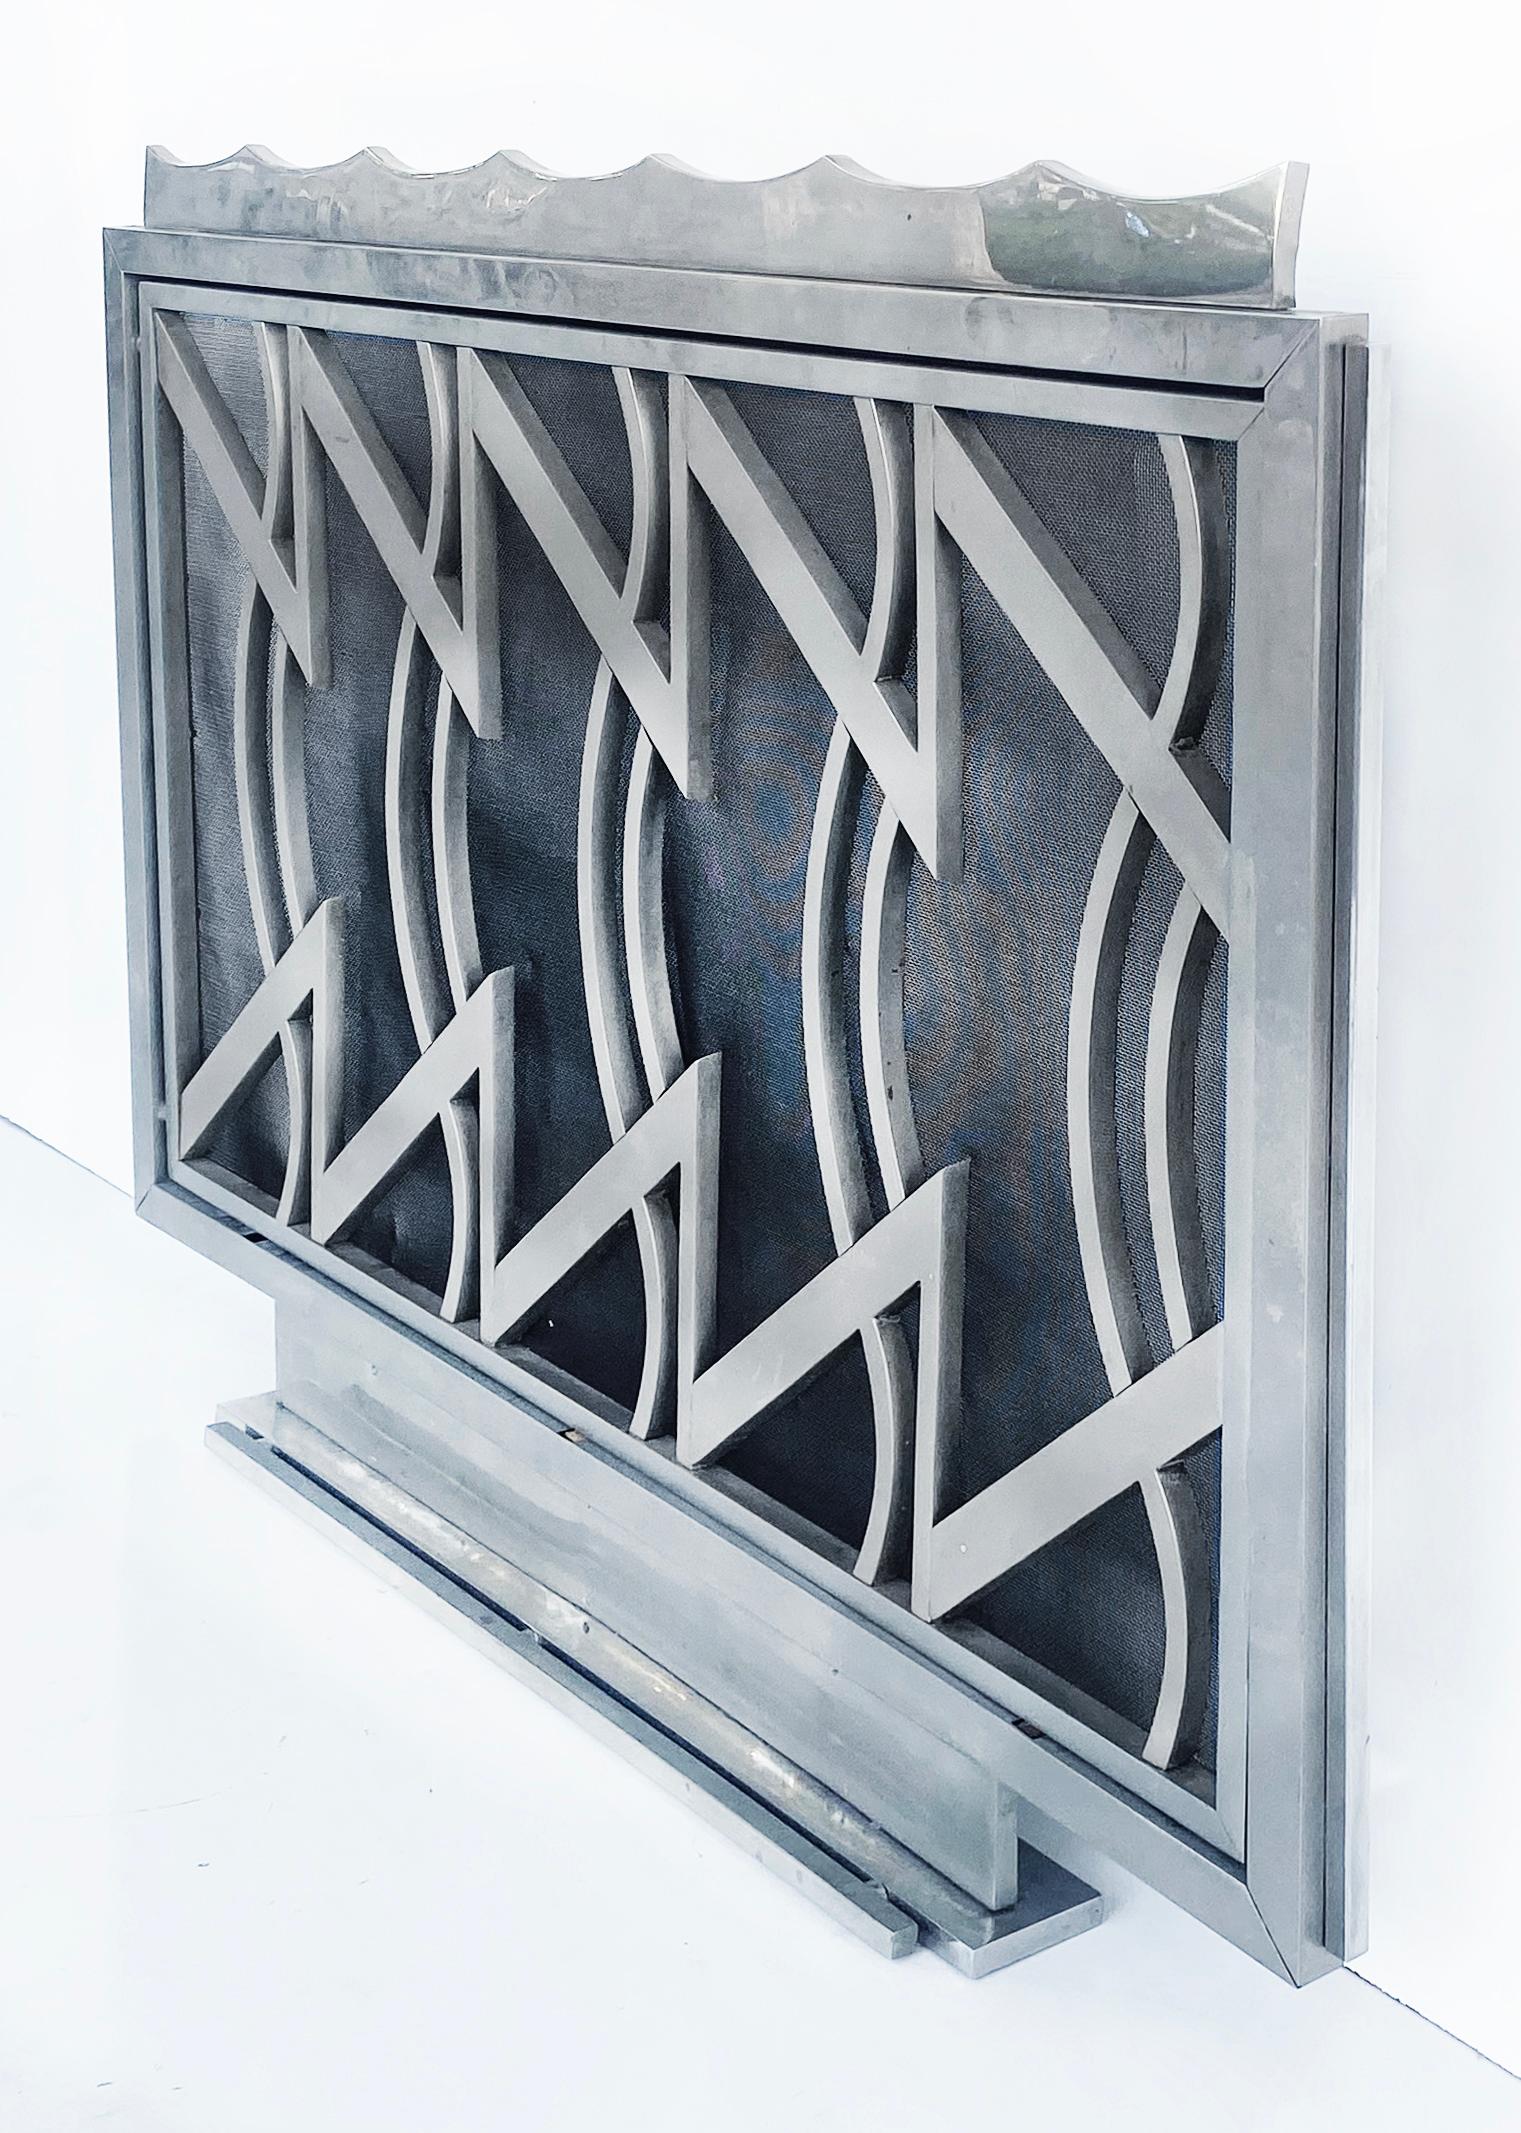 French Stylized Art Deco fireplace screen, French Riviera acquisition

Offered for sale is a French Art Deco highly stylized fireplace screen recently acquired from a client who purchased it in the south of France for a home she owned on the